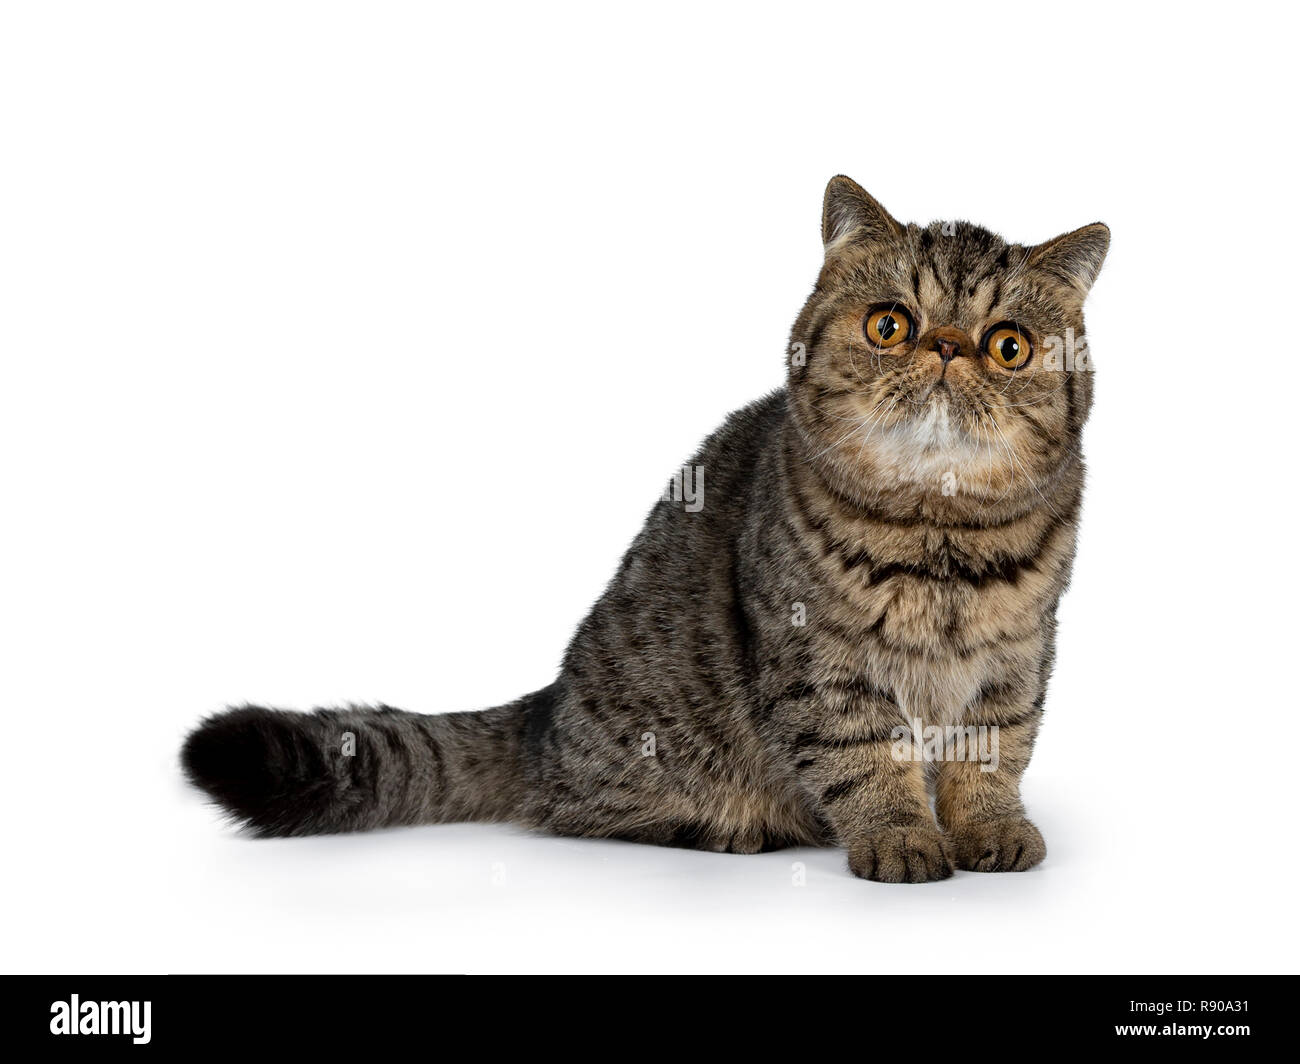 Adorable black tabby Exotic Shorthair cat kitten, sitting side ways with tail behind body. Looking beside camera with big round orange eyes. Isolated Stock Photo